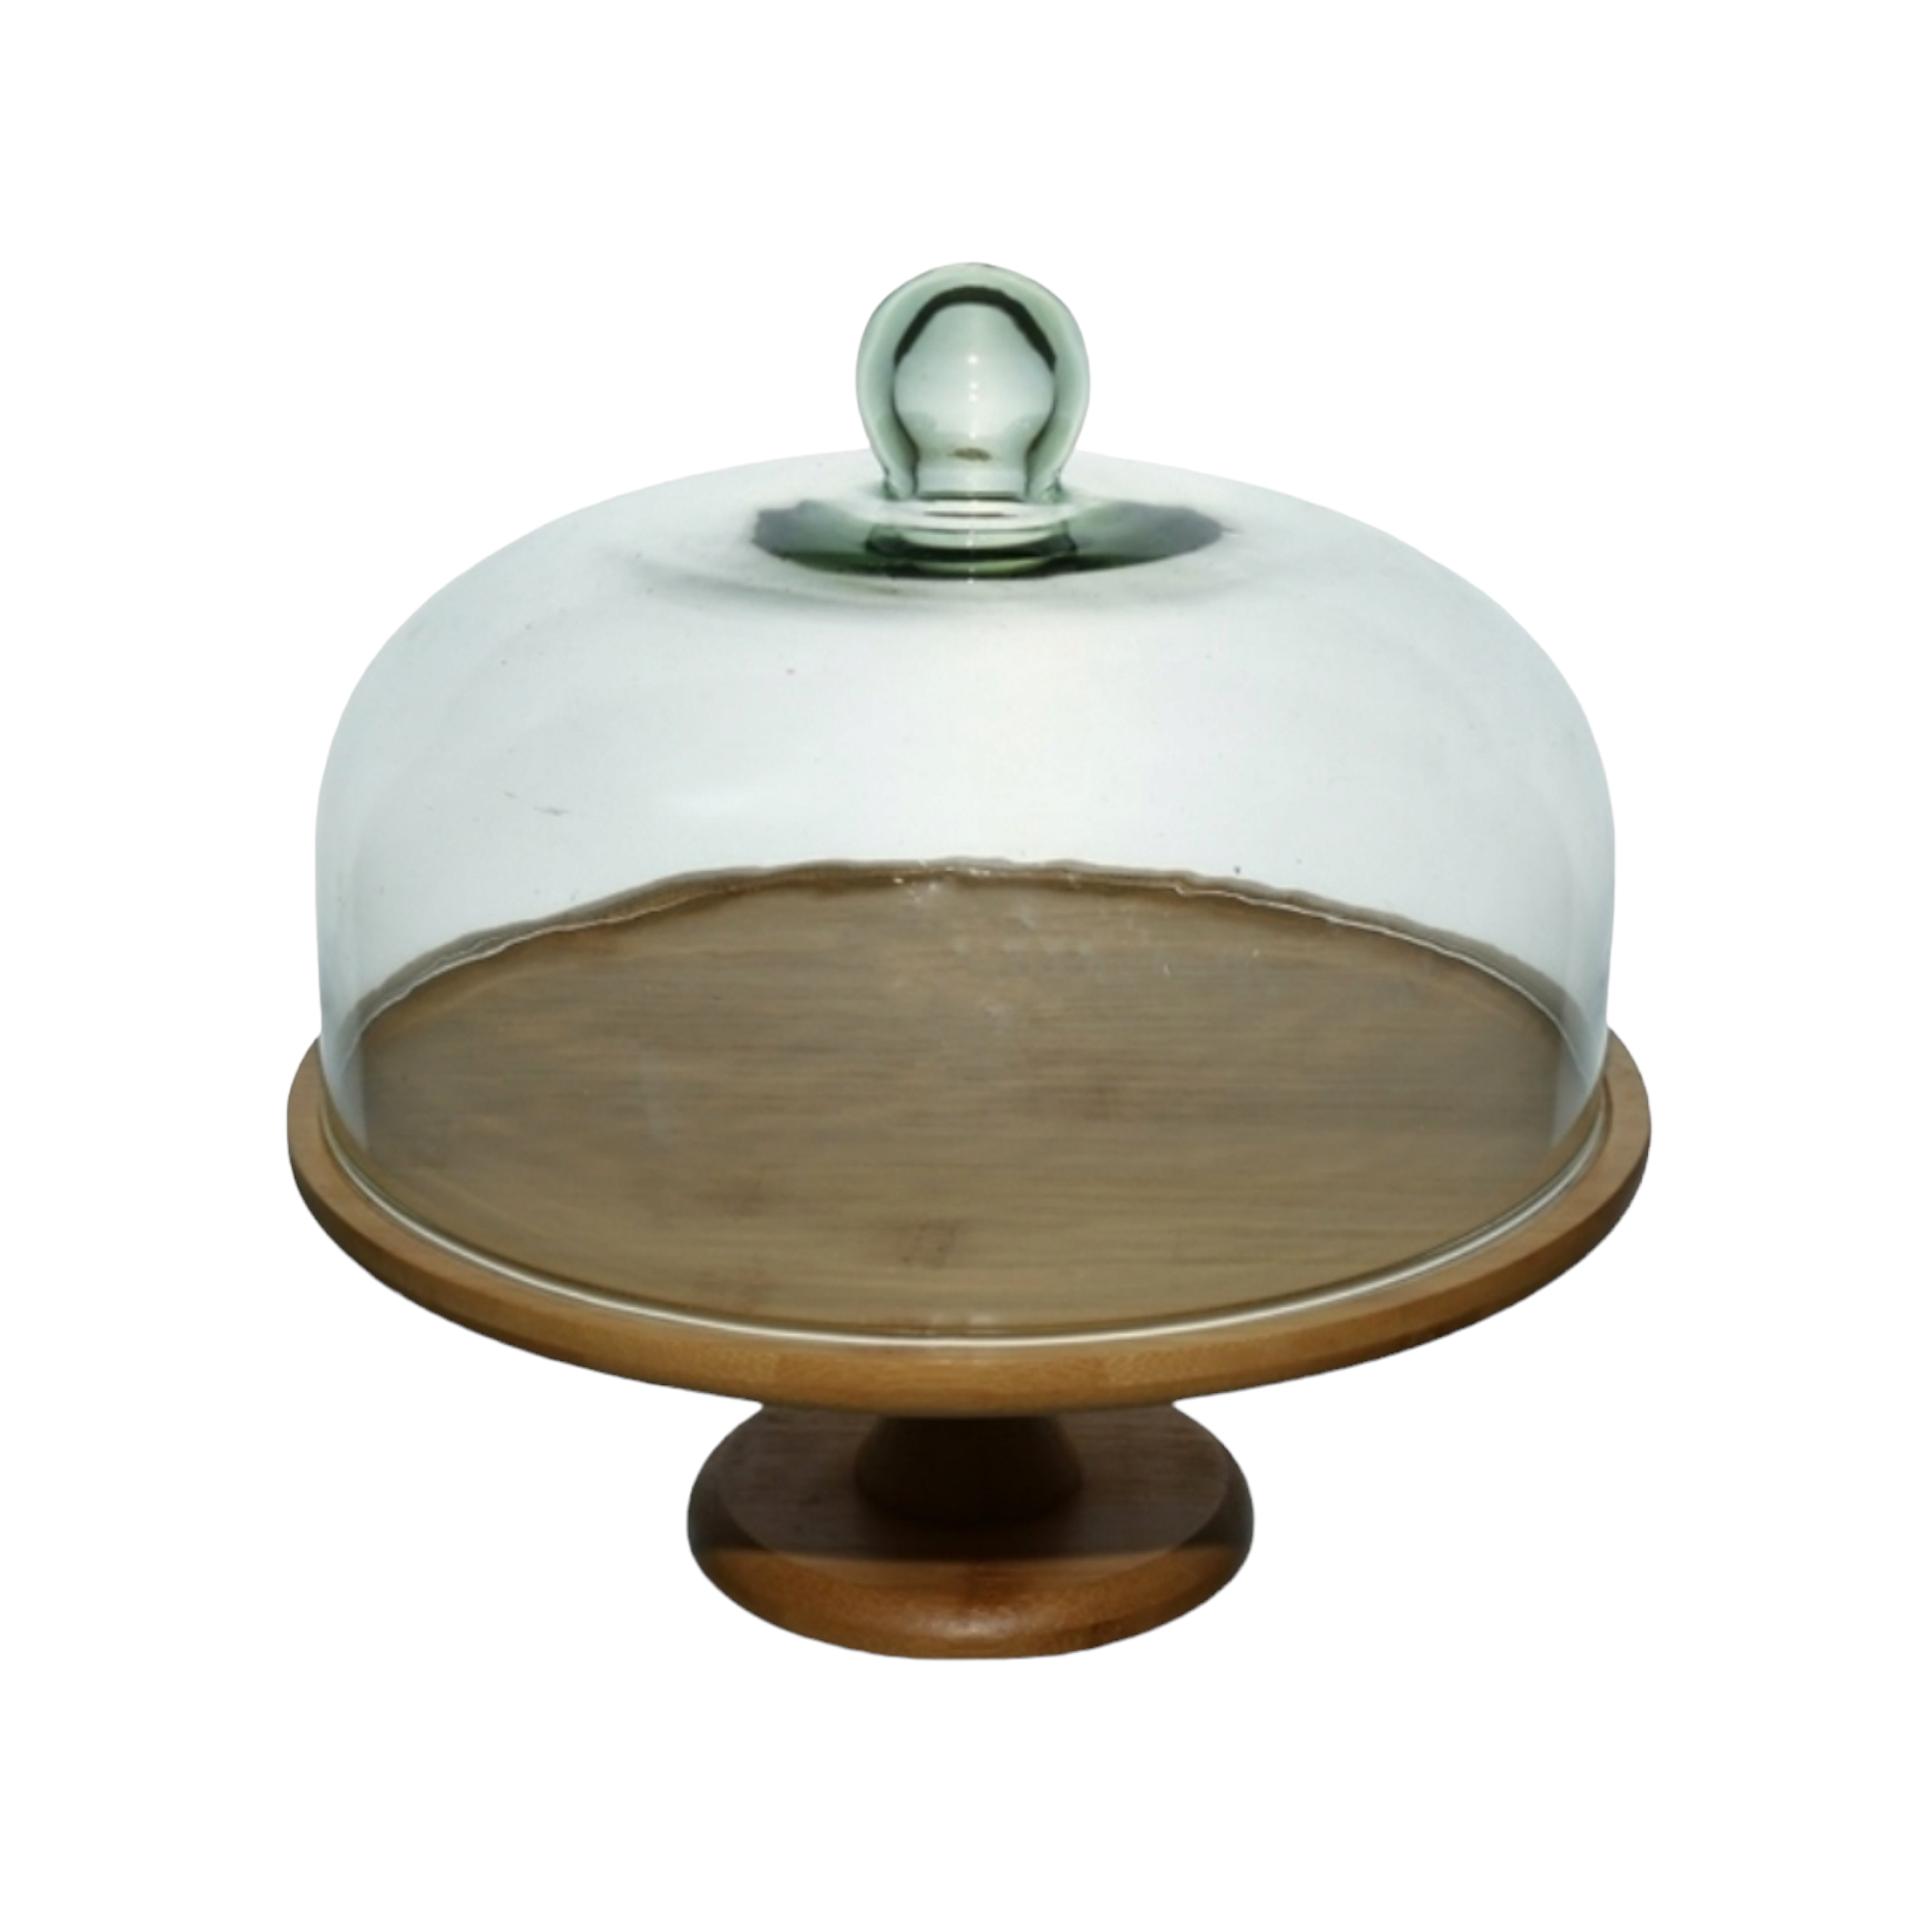 Patisserie Cake Dome Server 29cm with Acacia Wooden Base Footed Stand 34552